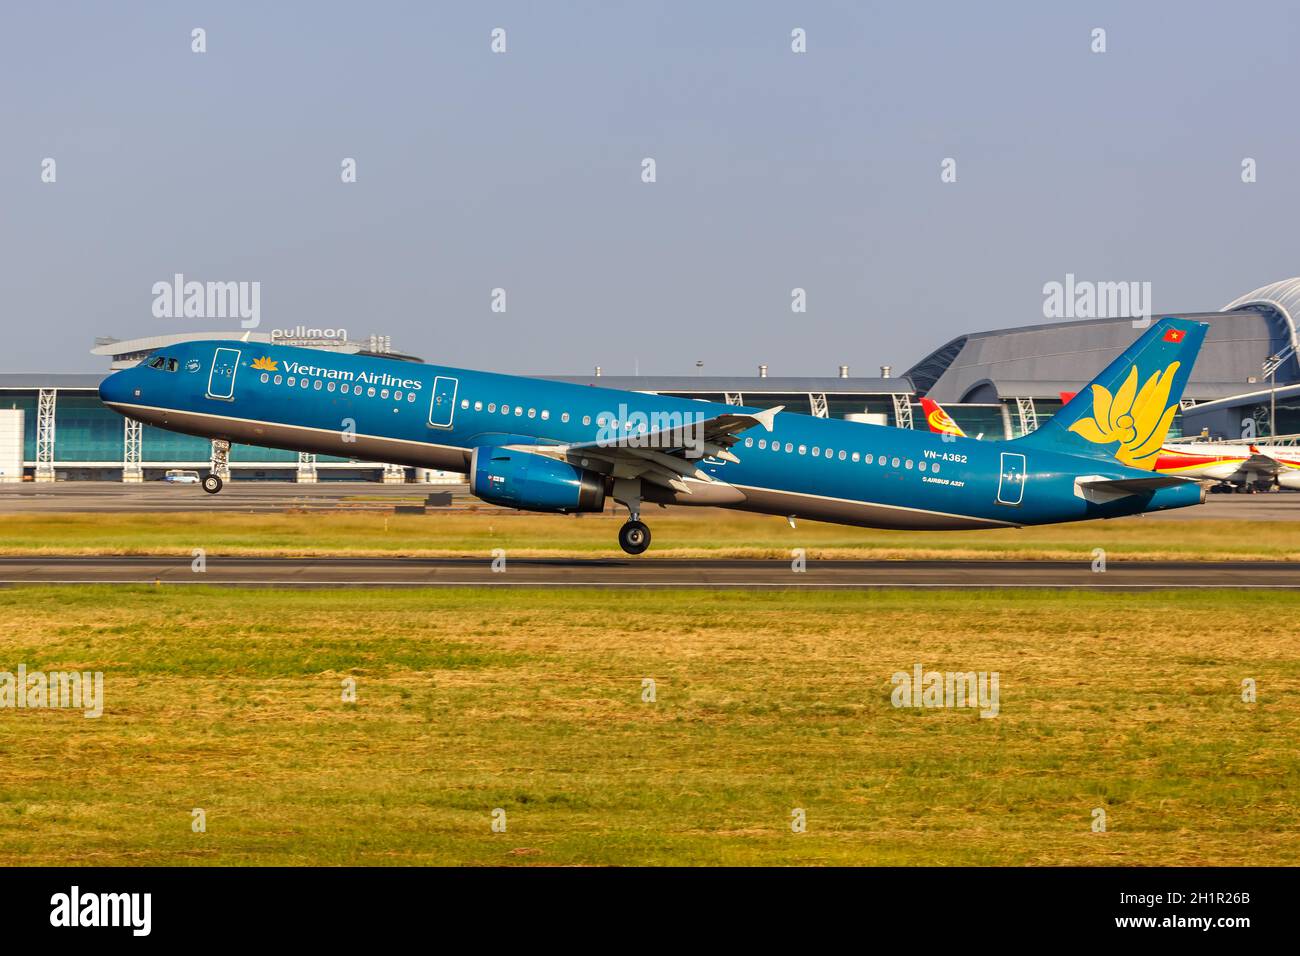 Guangzhou, China - September 23, 2019: Vietnam Airlines Airbus A321 airplane at Guangzhou Baiyun Airport (CAN) in China. Airbus is a European aircraft Stock Photo